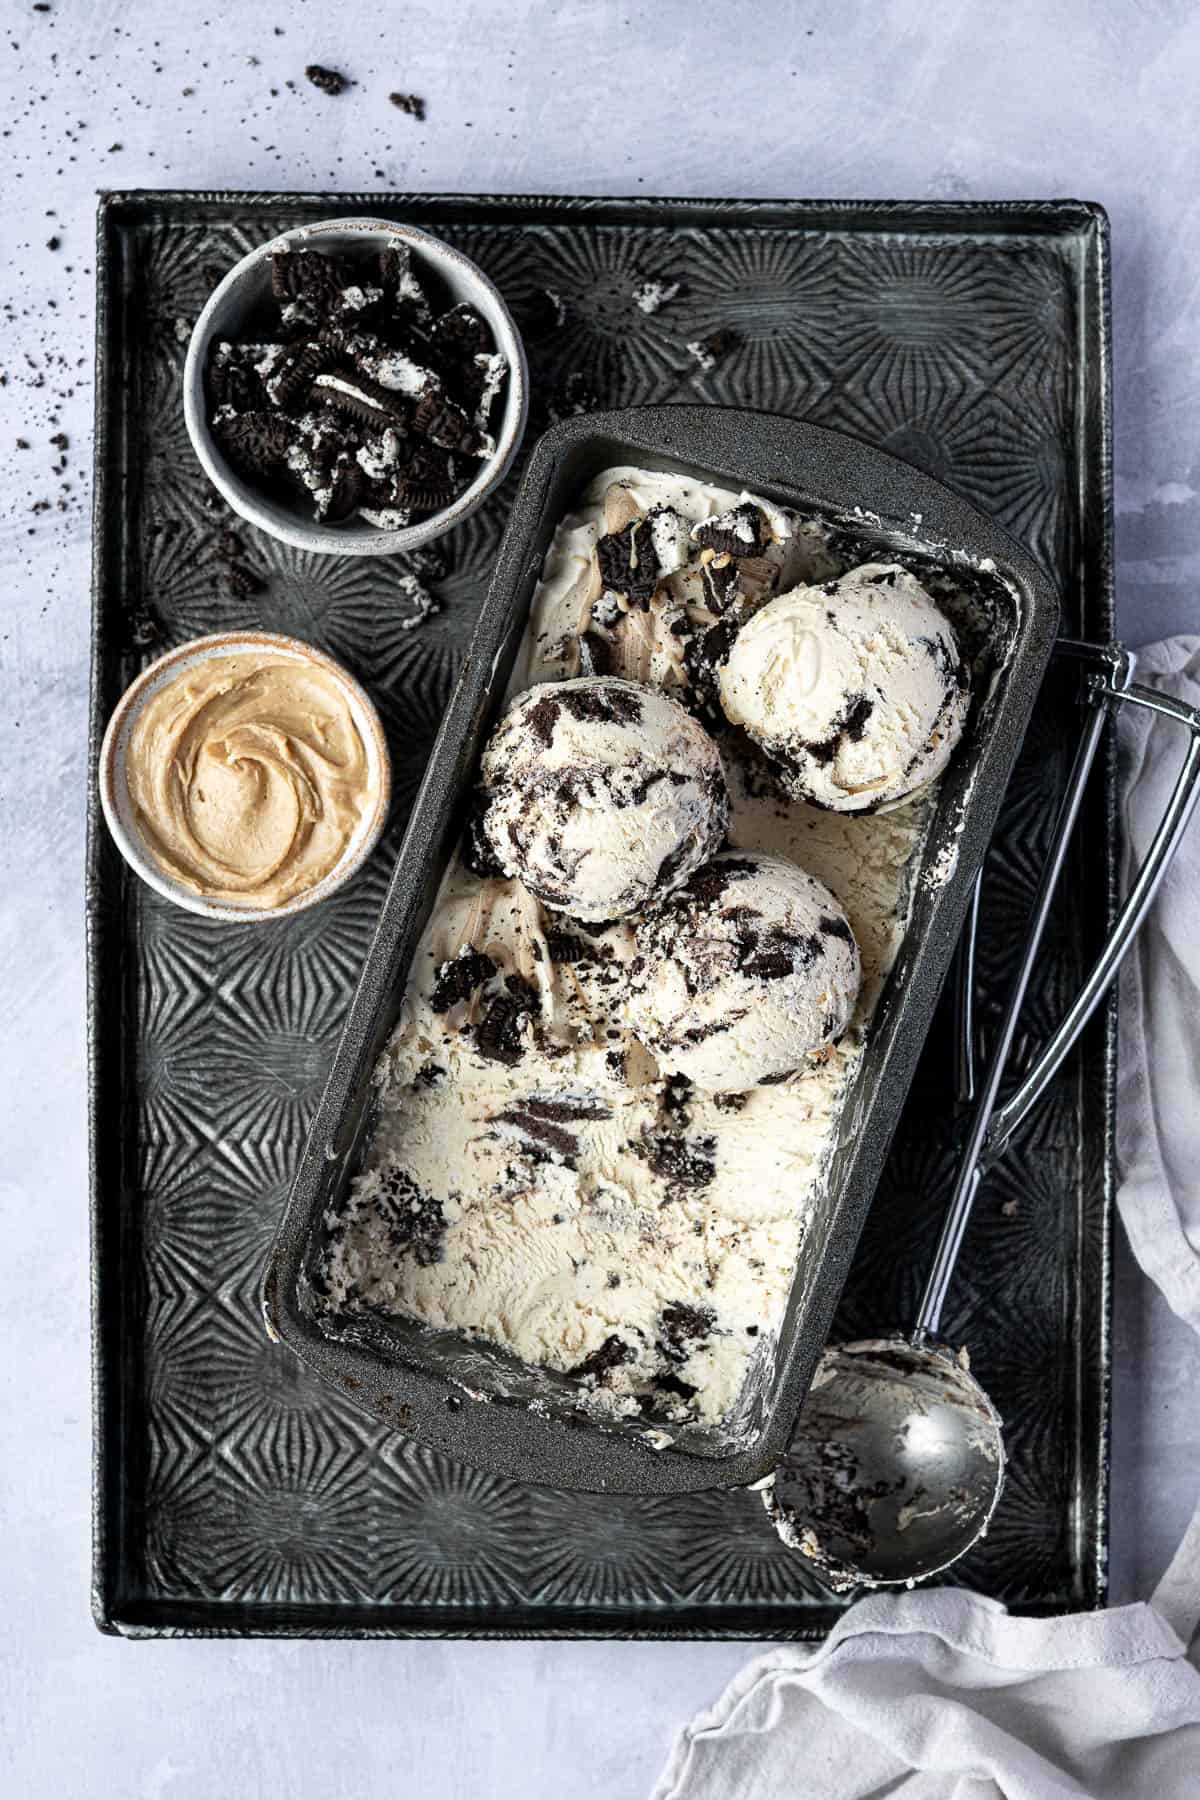 No-churn peanut butter Oreo ice cream in a loaf tin on a tray with an ice cream scoop and bowls of peanut butter and crushed Oreos.